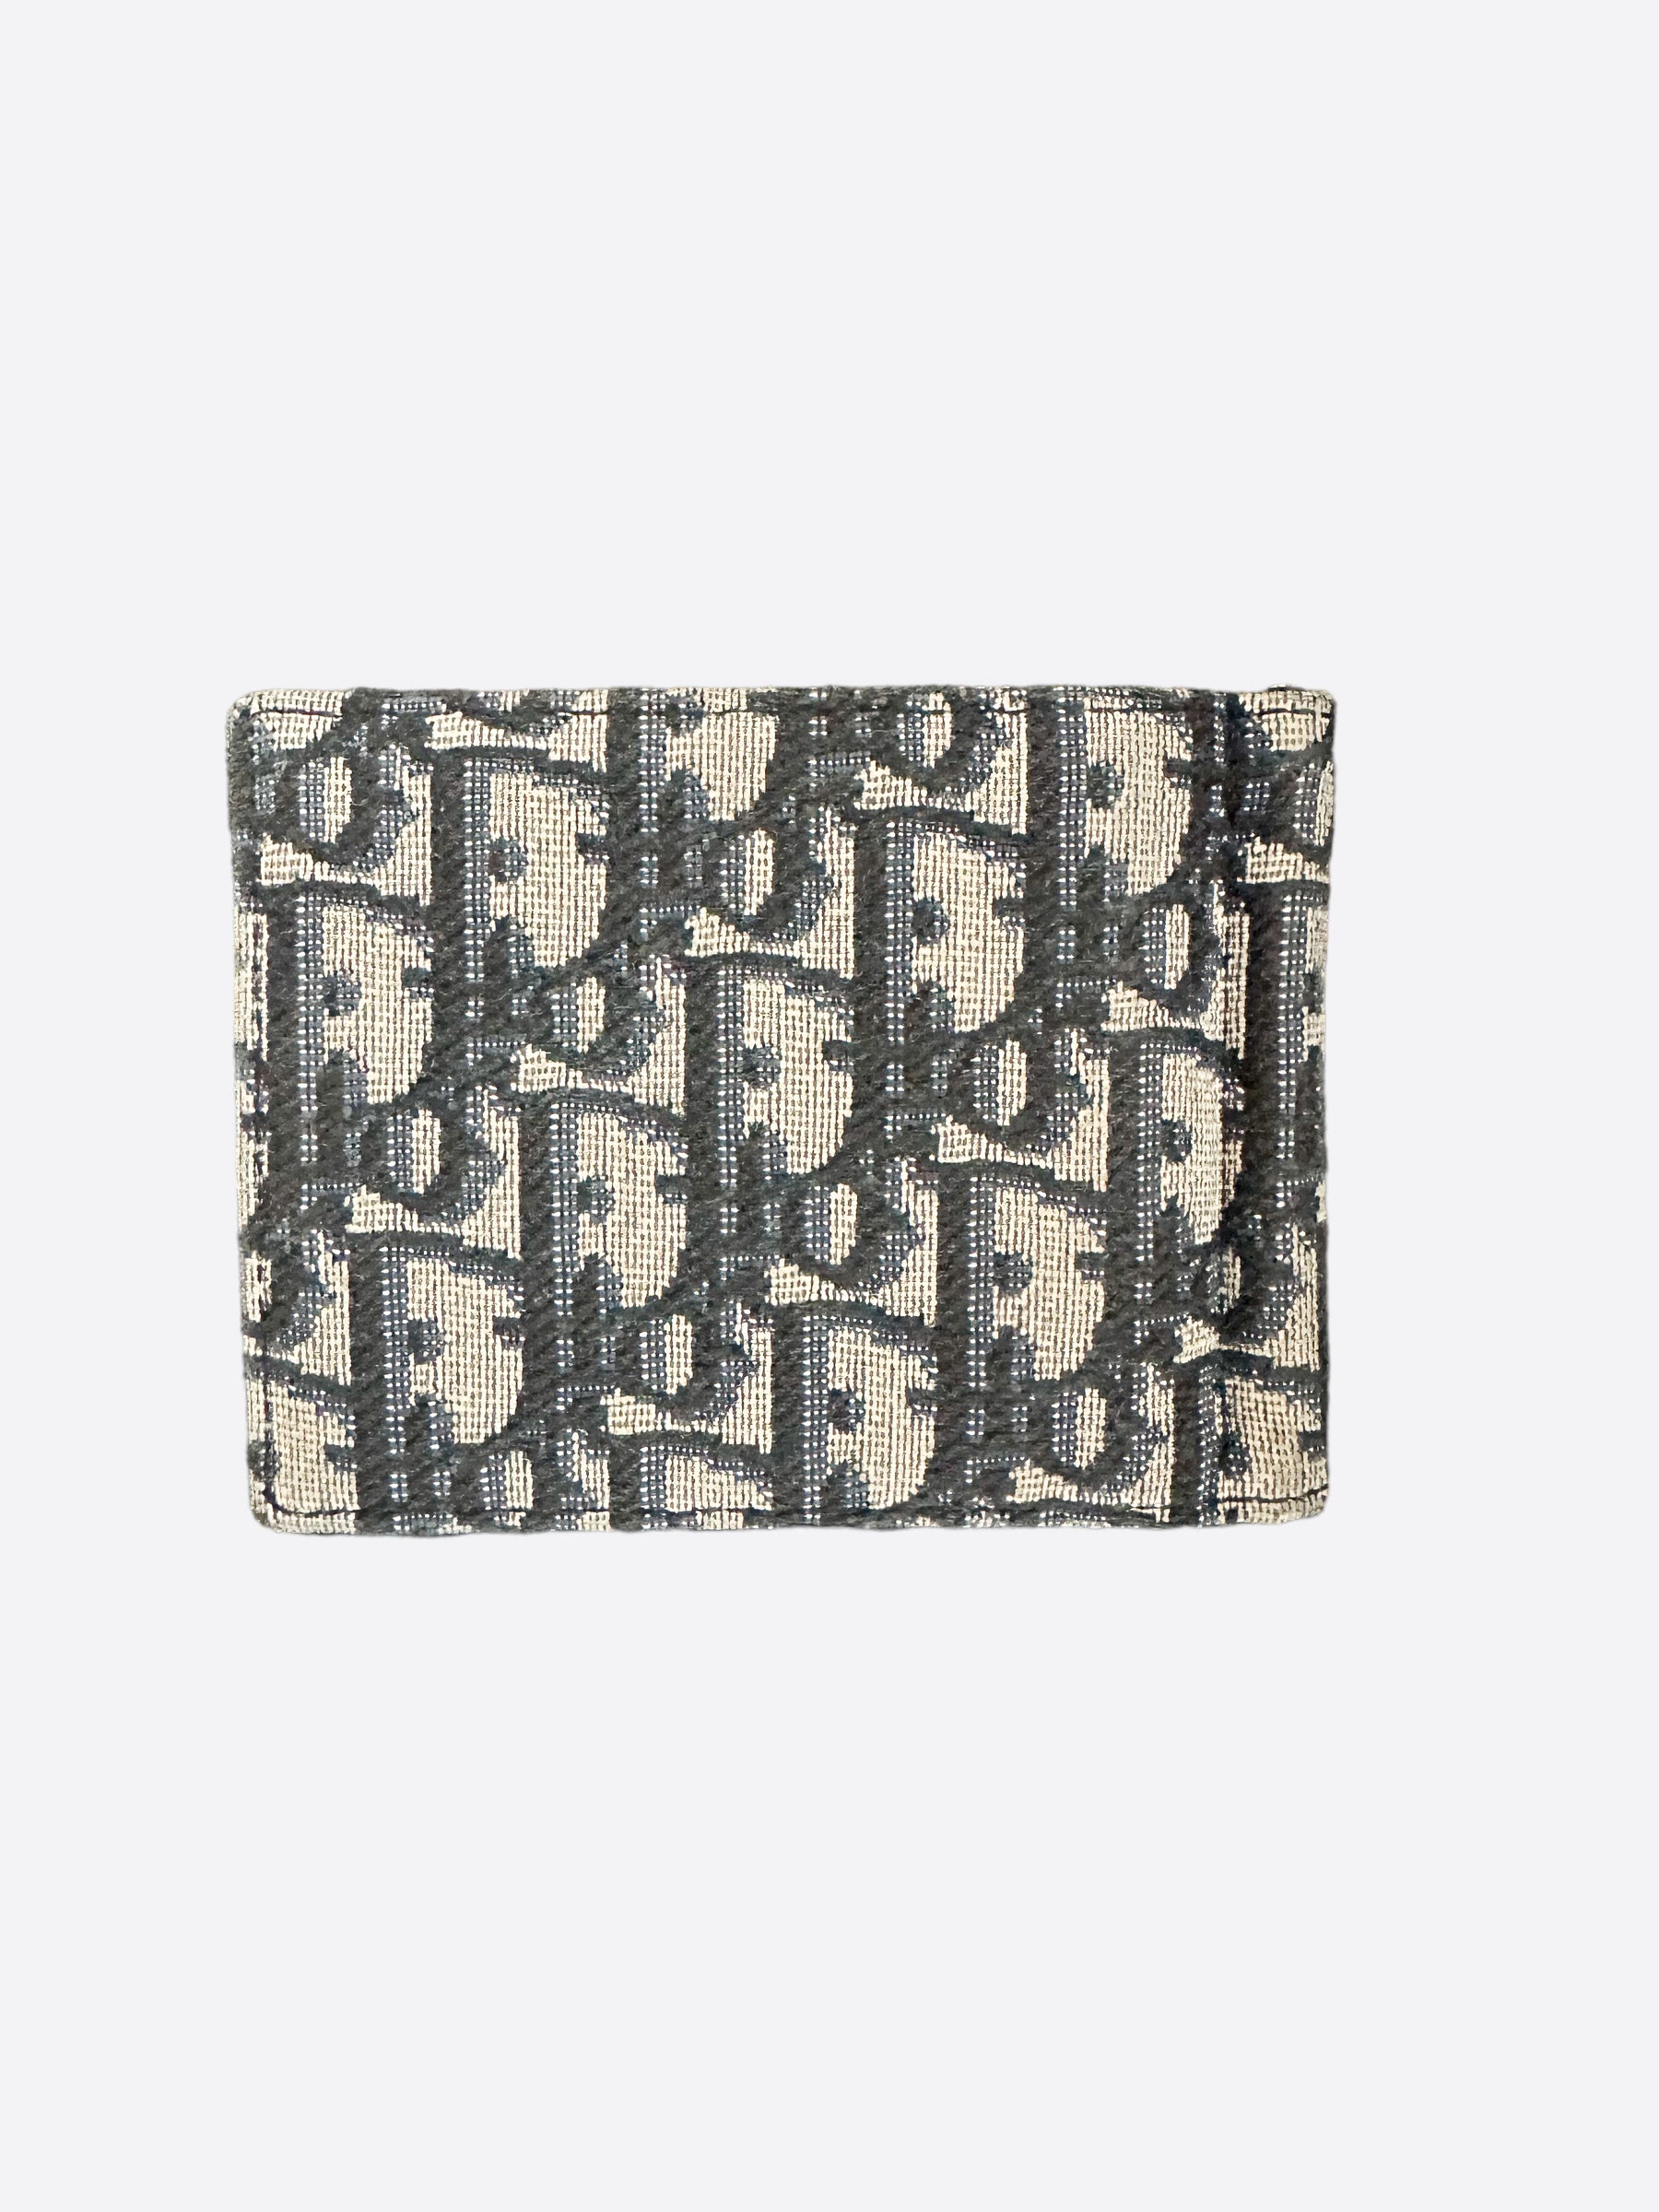 Wallet with Bill Clip Beige and Black Dior Oblique Jacquard